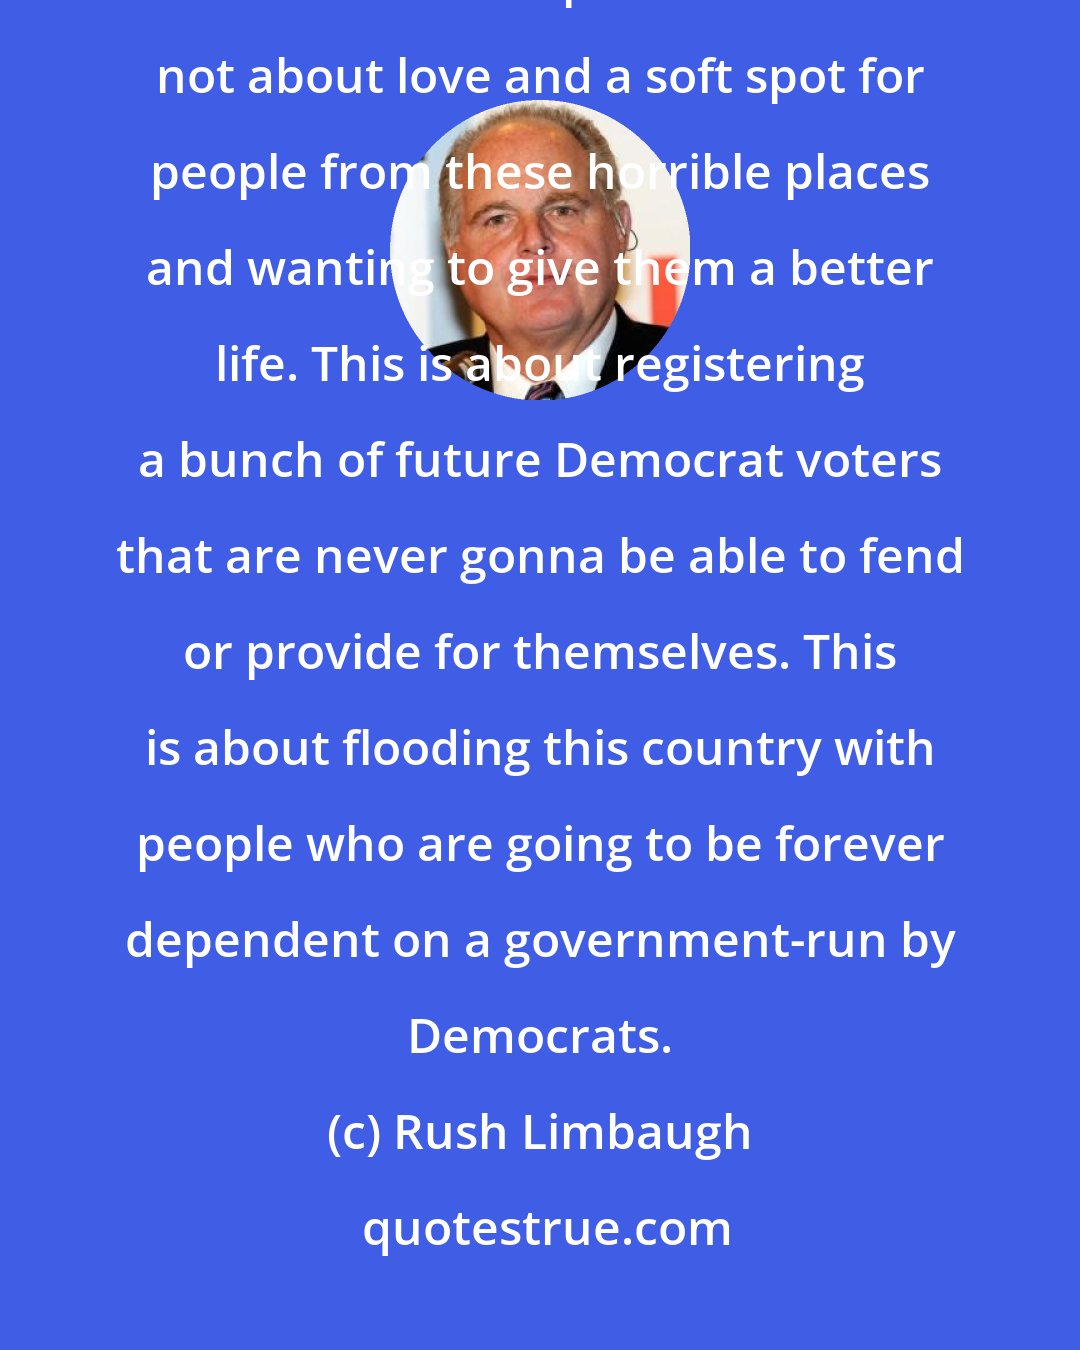 Rush Limbaugh: The Democrats want illegal mirgation not they are humanitarian. This is not about compassion. This is not about love and a soft spot for people from these horrible places and wanting to give them a better life. This is about registering a bunch of future Democrat voters that are never gonna be able to fend or provide for themselves. This is about flooding this country with people who are going to be forever dependent on a government-run by Democrats.